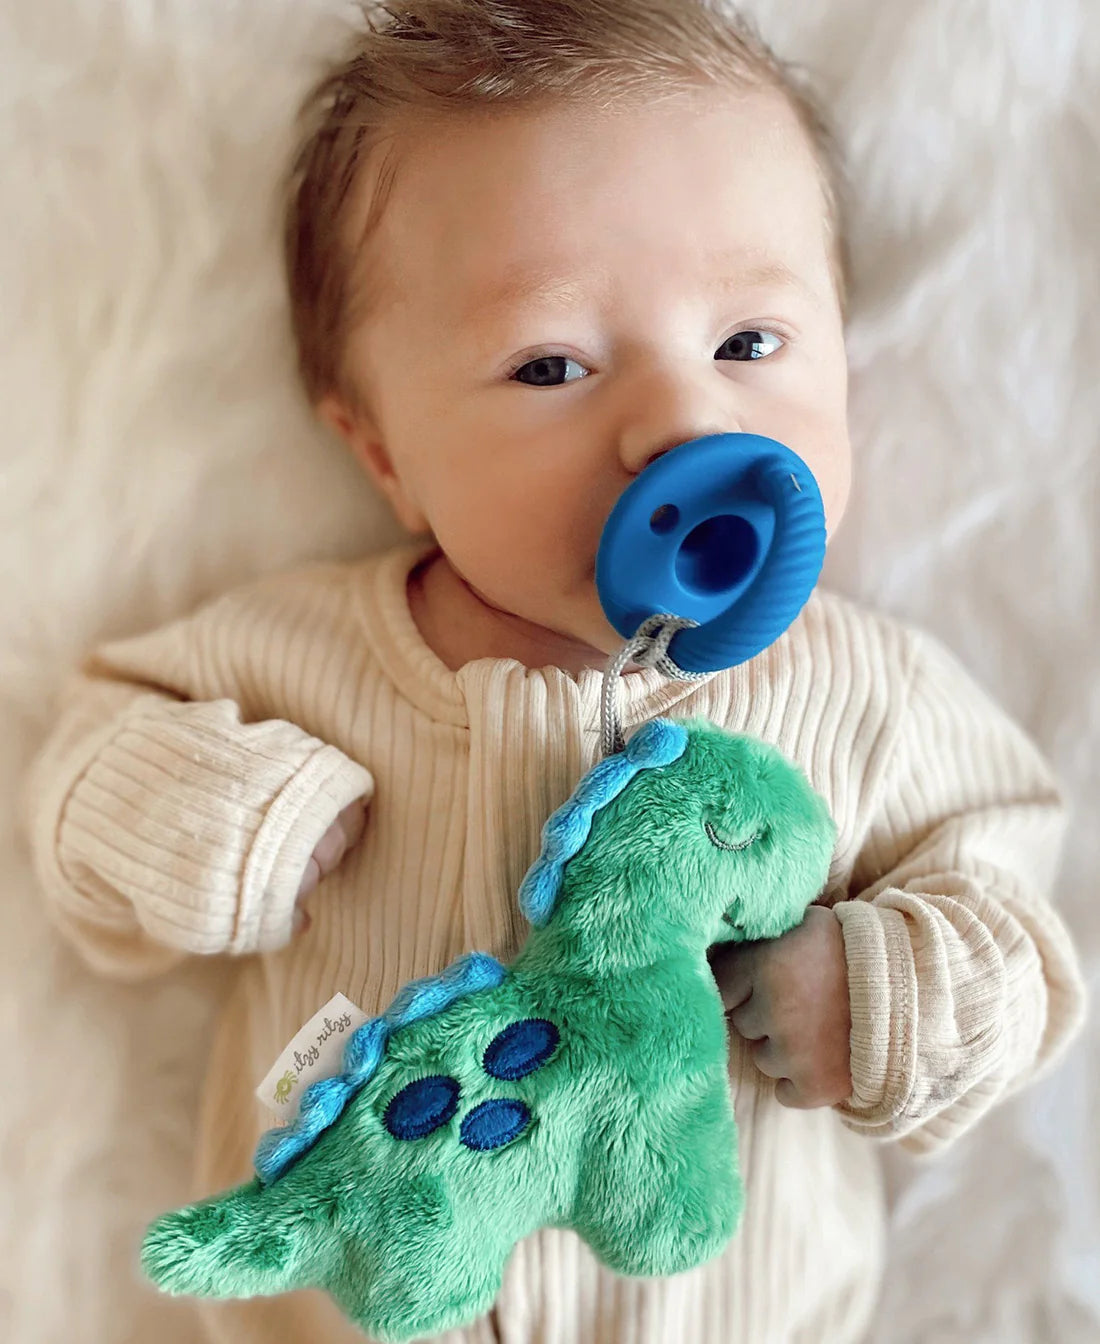 Itzy Ritzy - Sweetie Pal Pacifier & Stuffed Animal - James the Dino